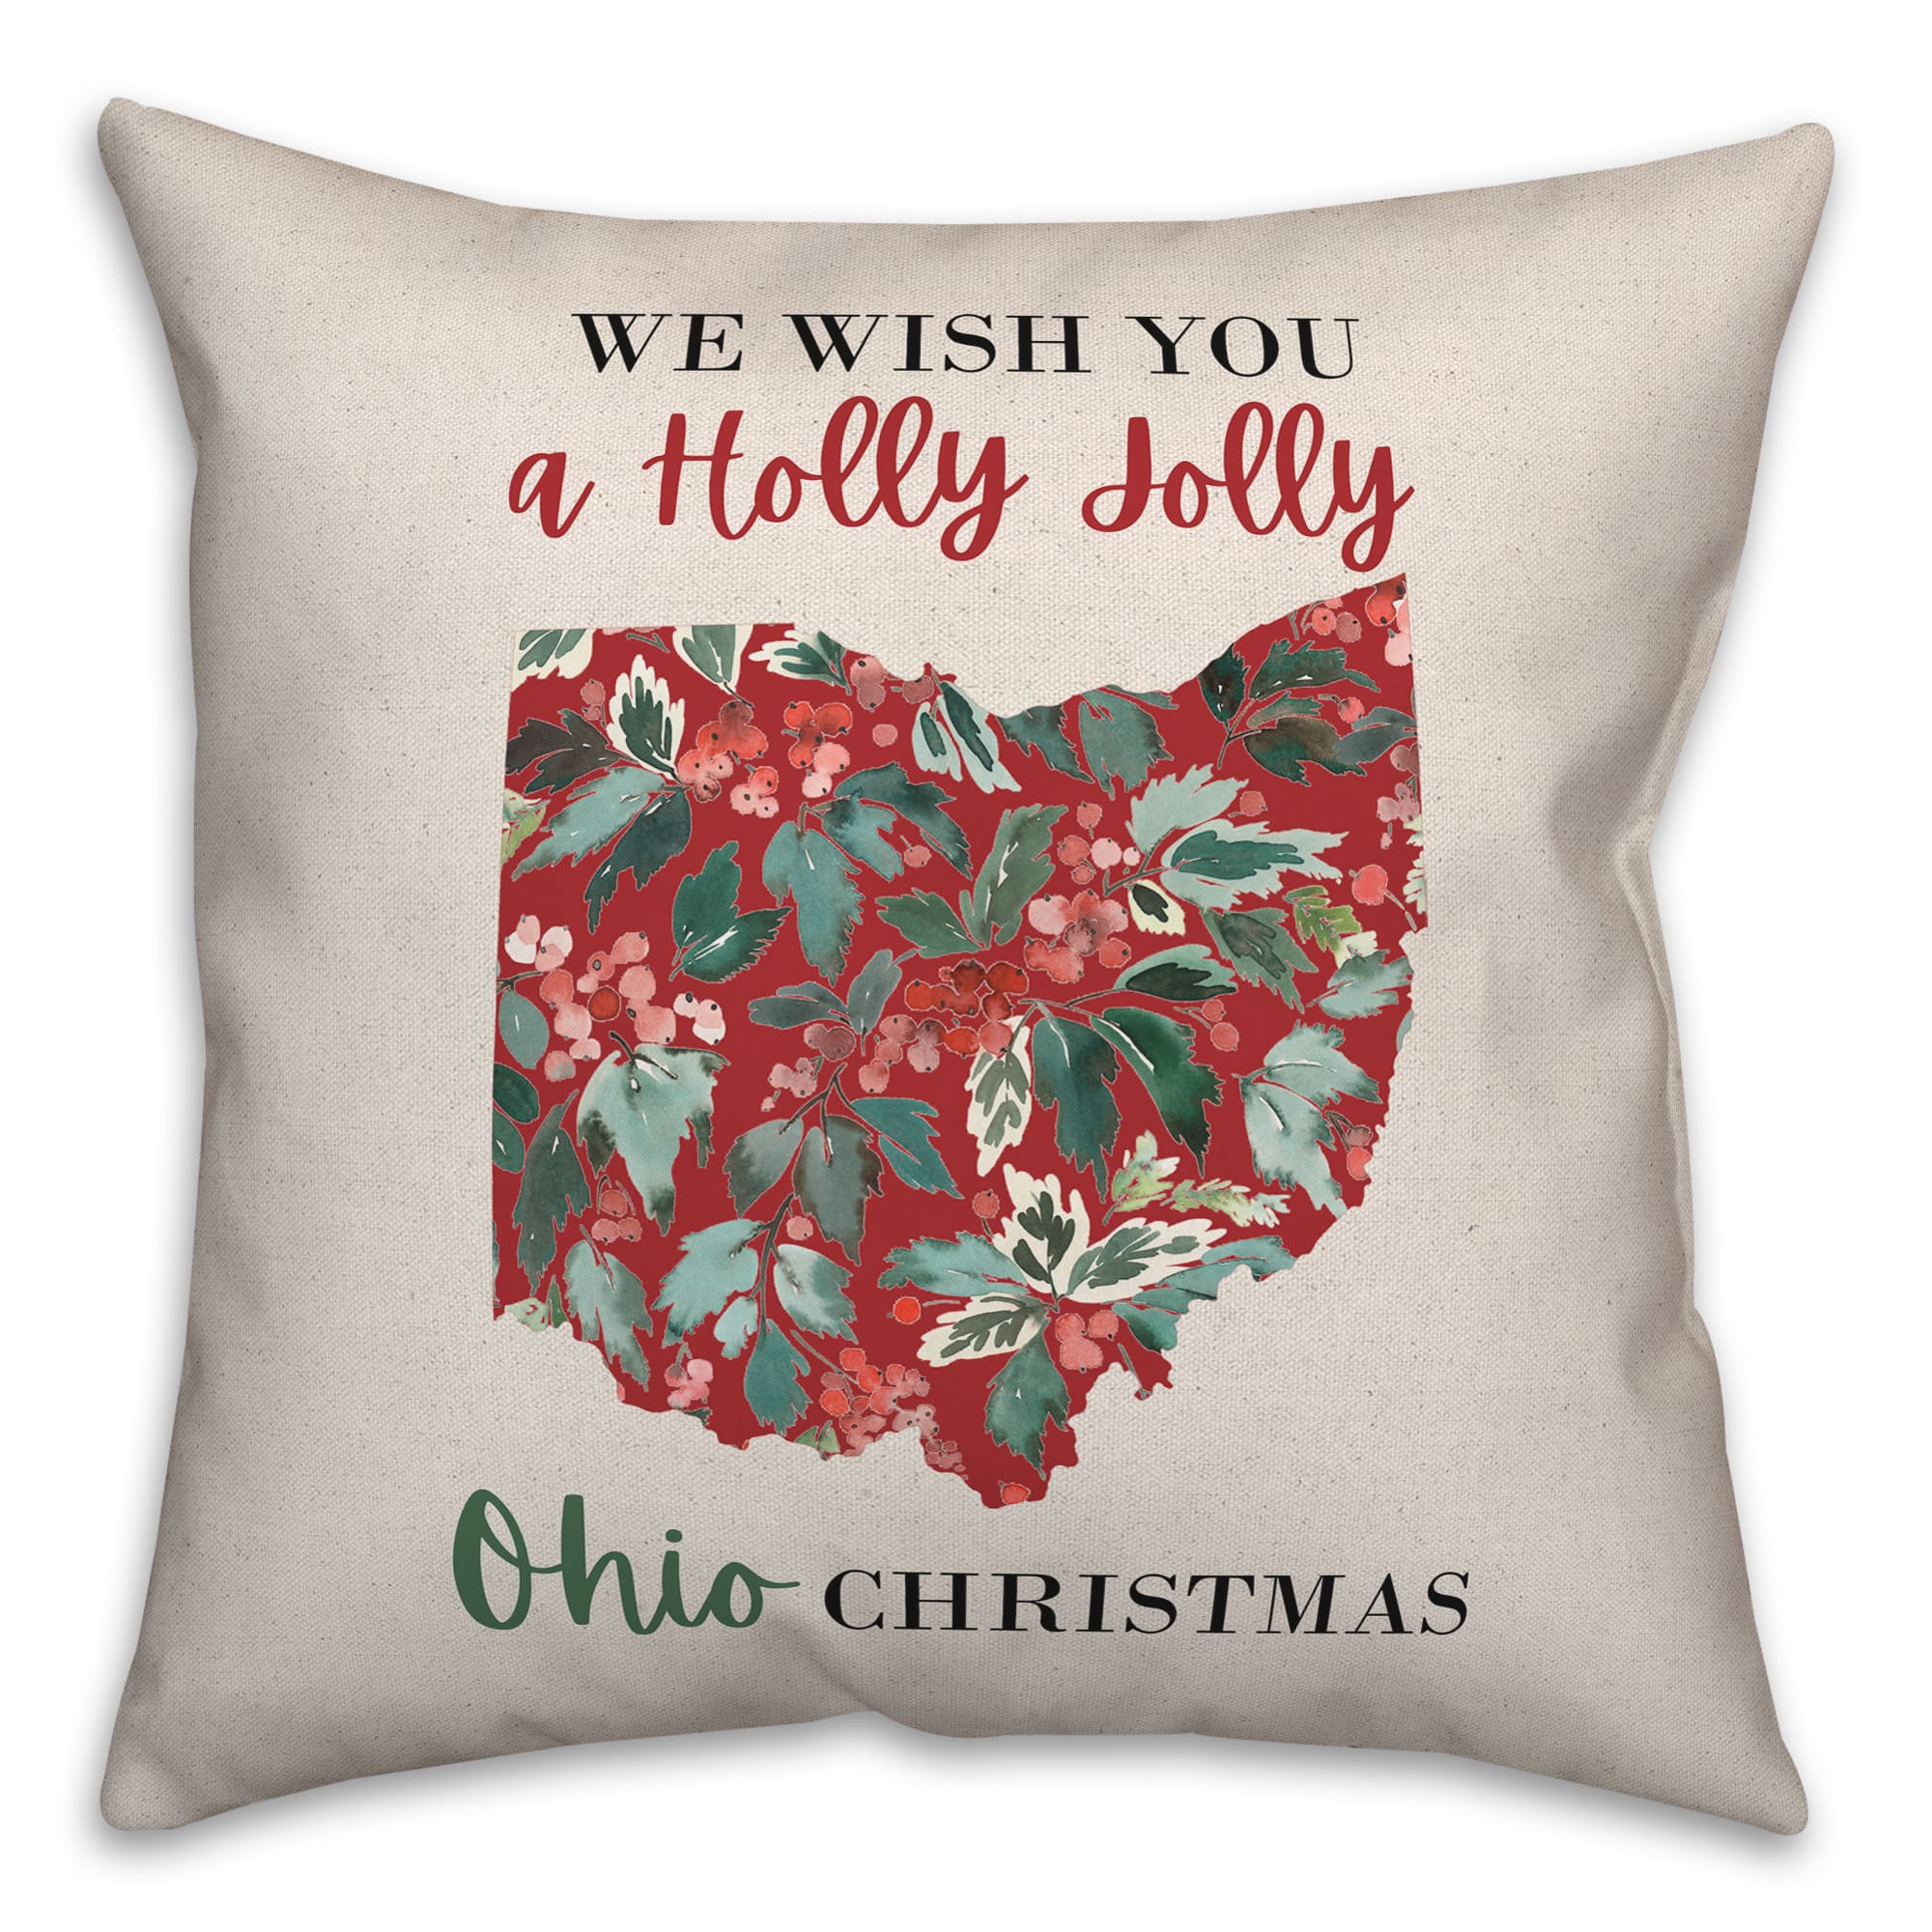 We Wish You a Holly Jolly Ohio Christmas Throw Pillow